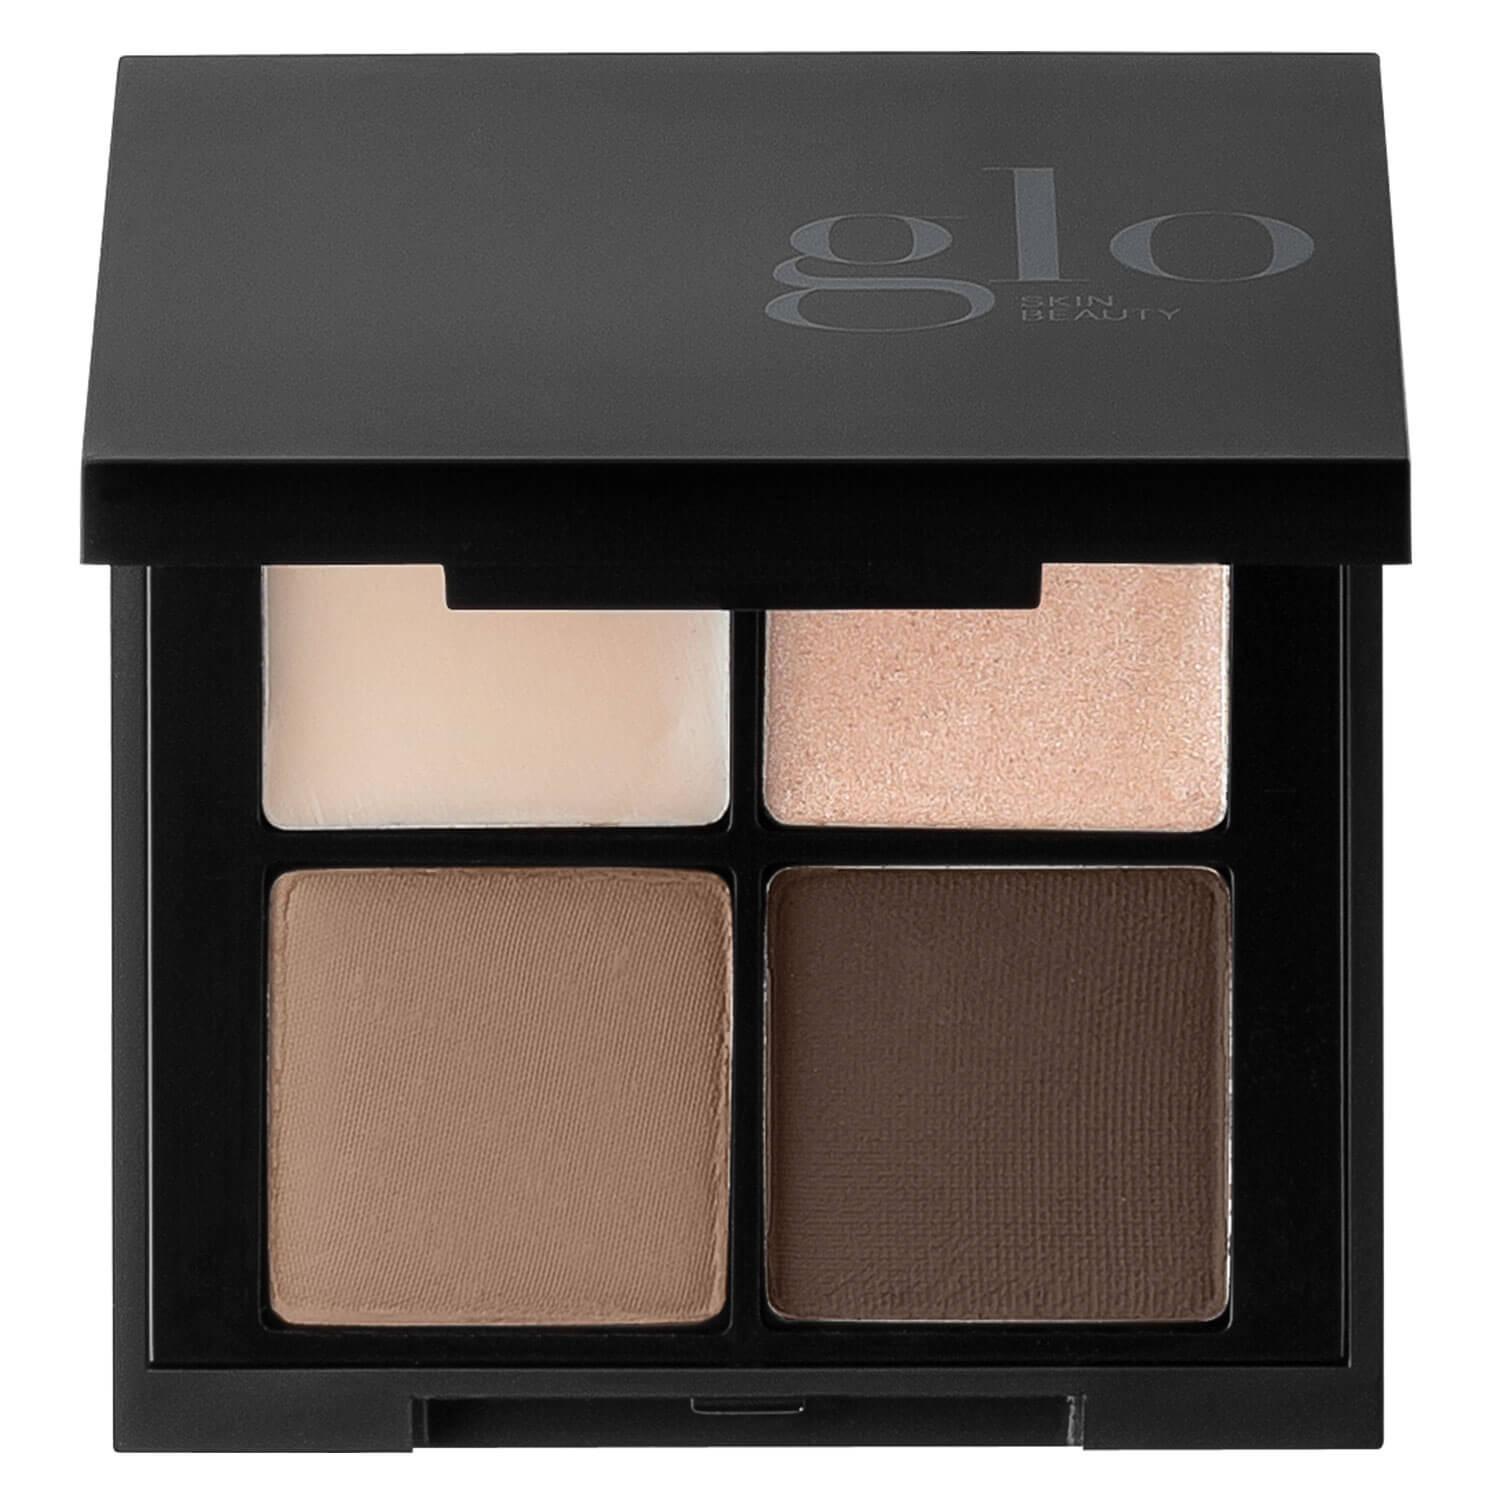 Glo Skin Beauty Brows - Brow Quad Brown